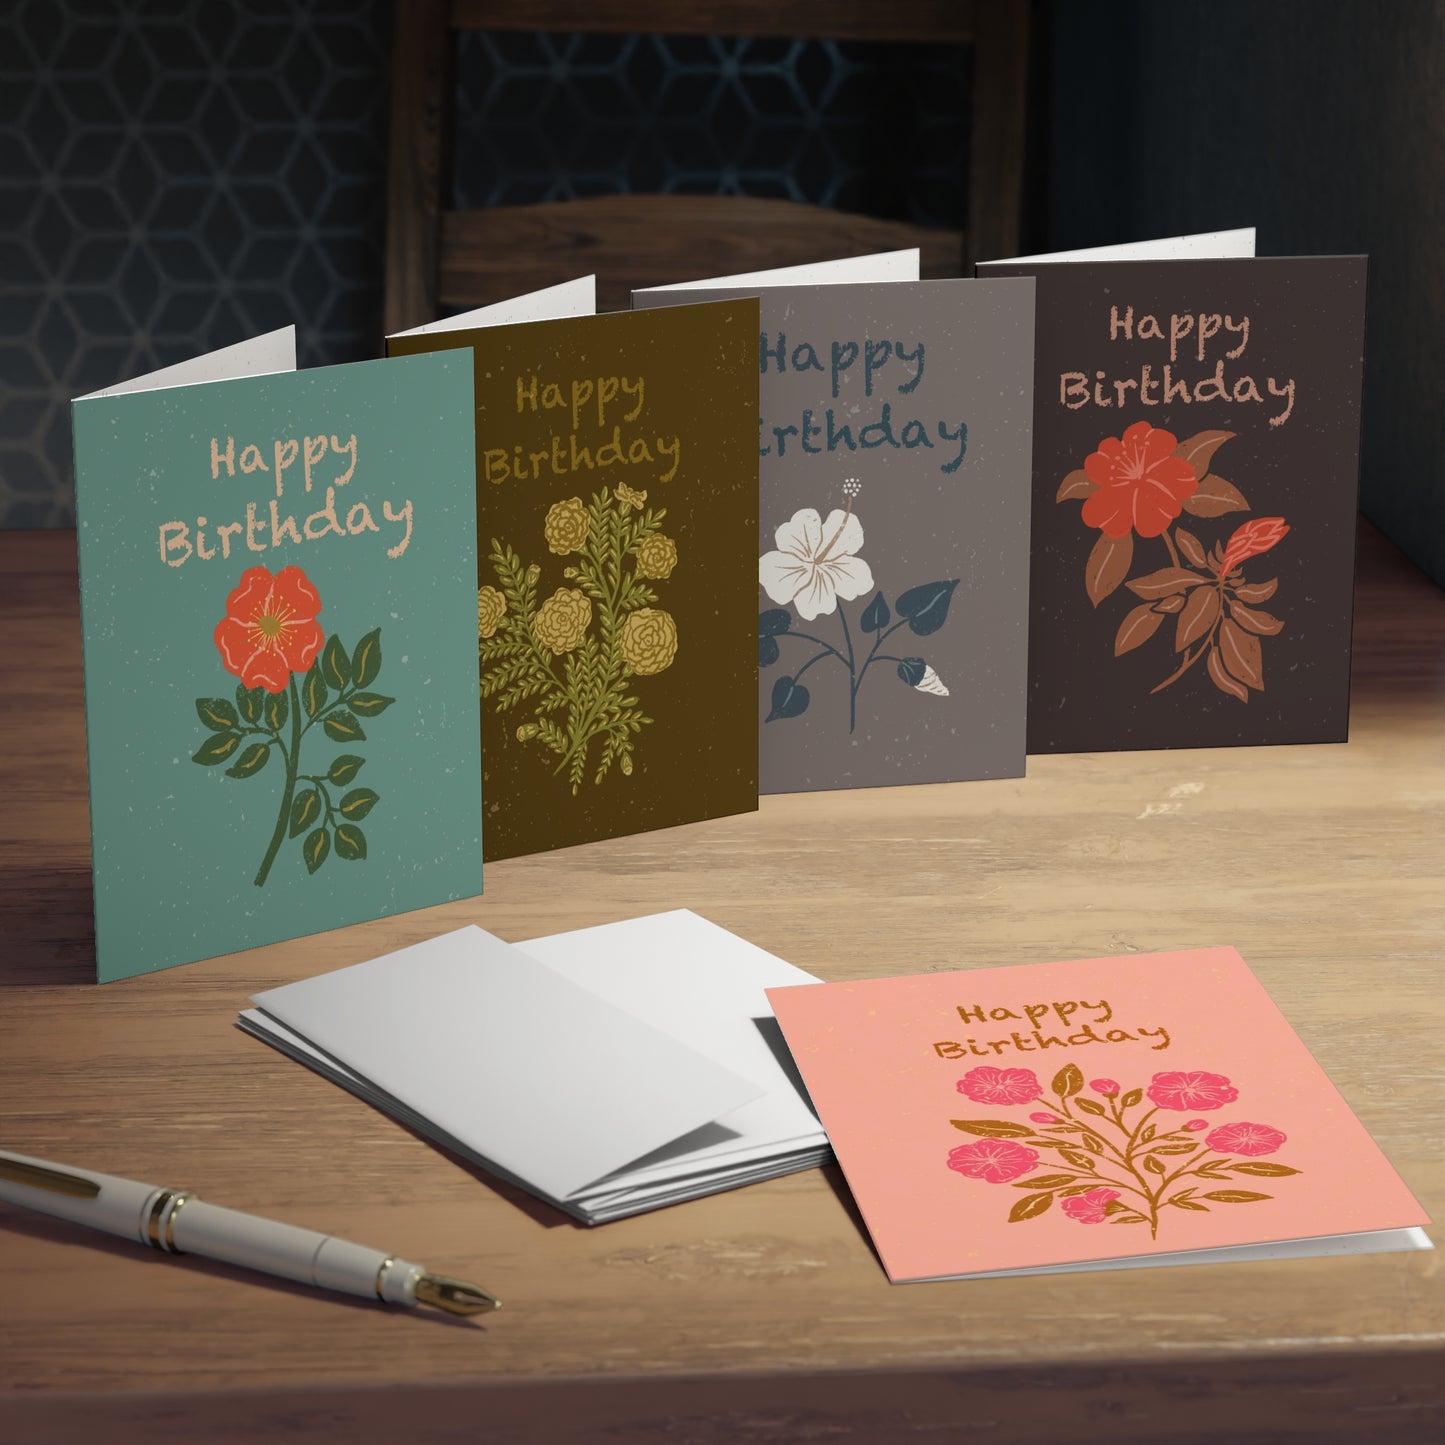 Birthday Cards with Five Different Block Print Style Flower Designs in Retro Colors (5 Pack)